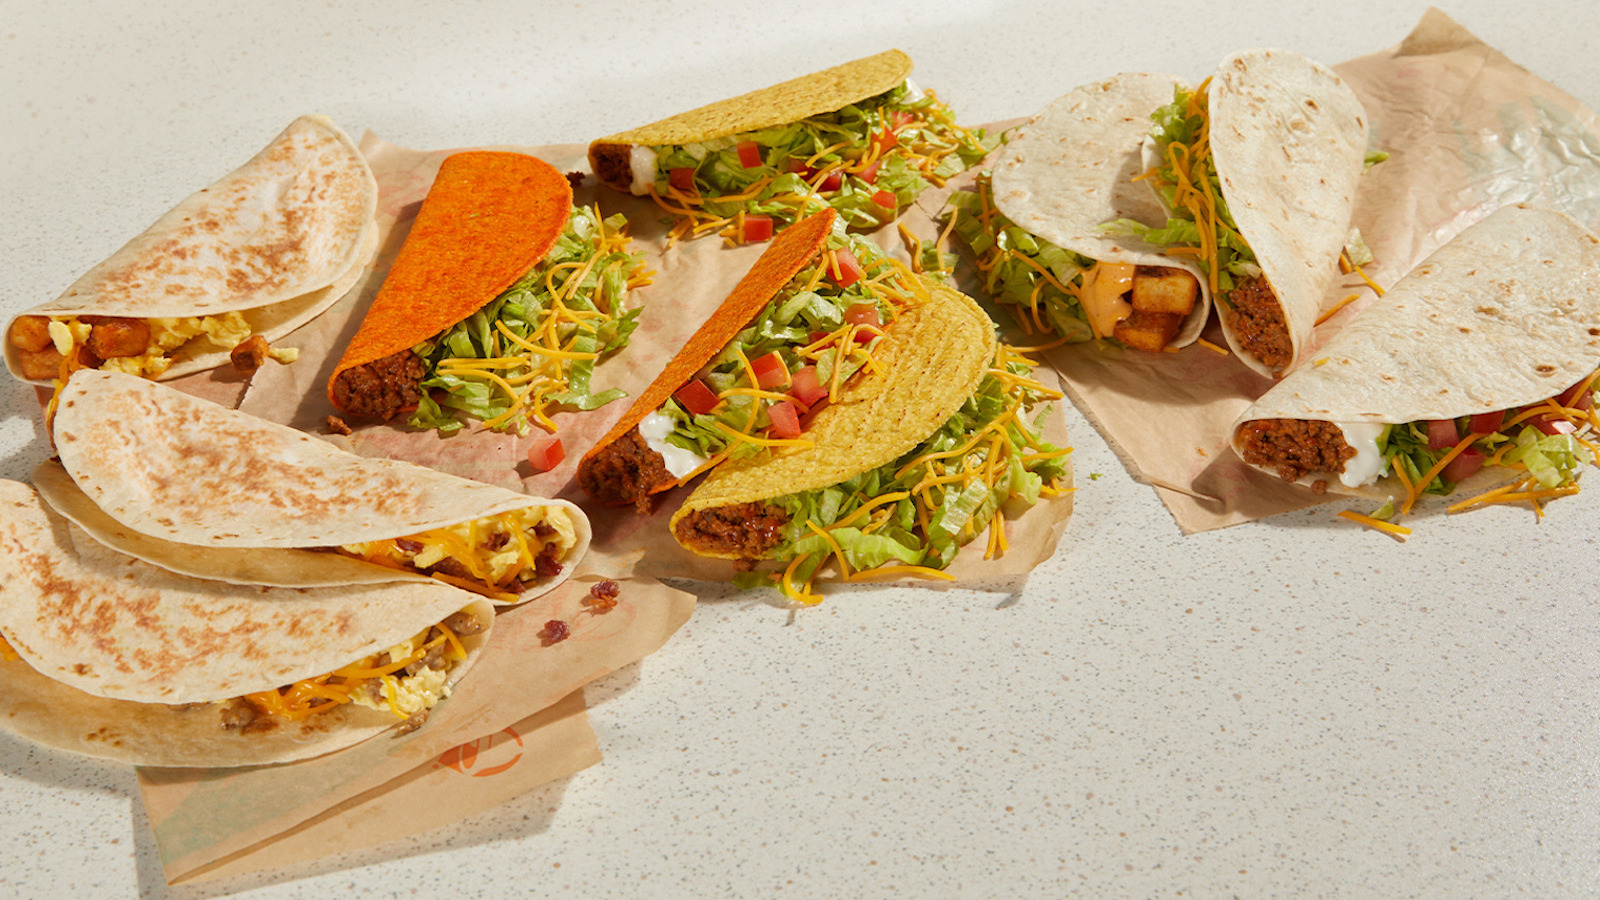 https://www.foodrepublic.com/img/gallery/taco-bell-announces-new-toasted-breakfast-tacos-and-the-return-of-taco-lovers-pass/l-intro-1696335259.jpg